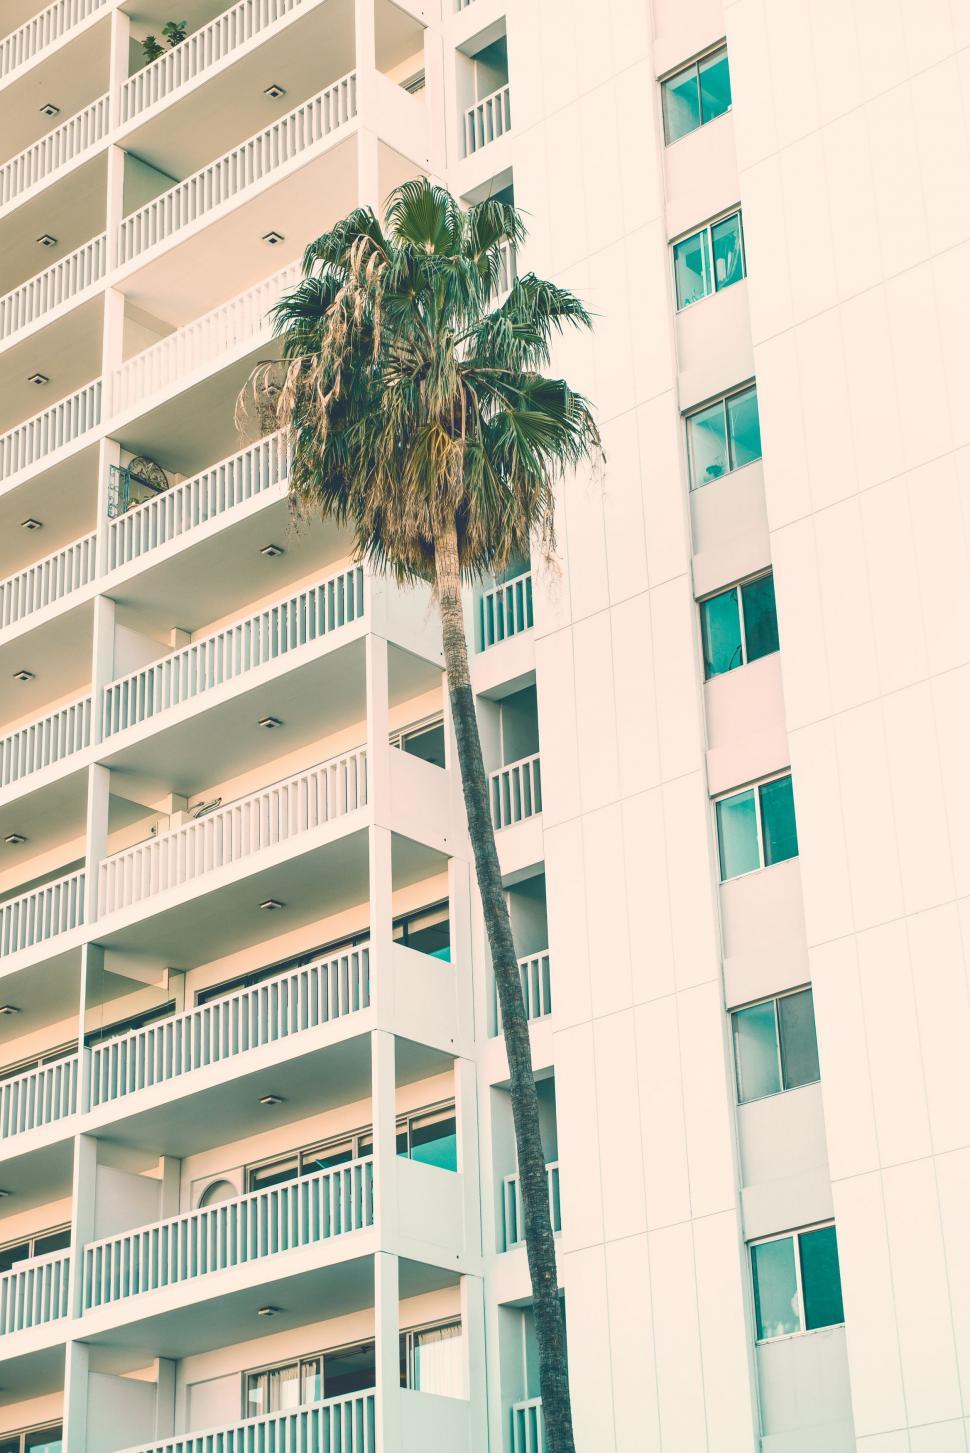 Free Image of Tall White Building With Palm Tree 